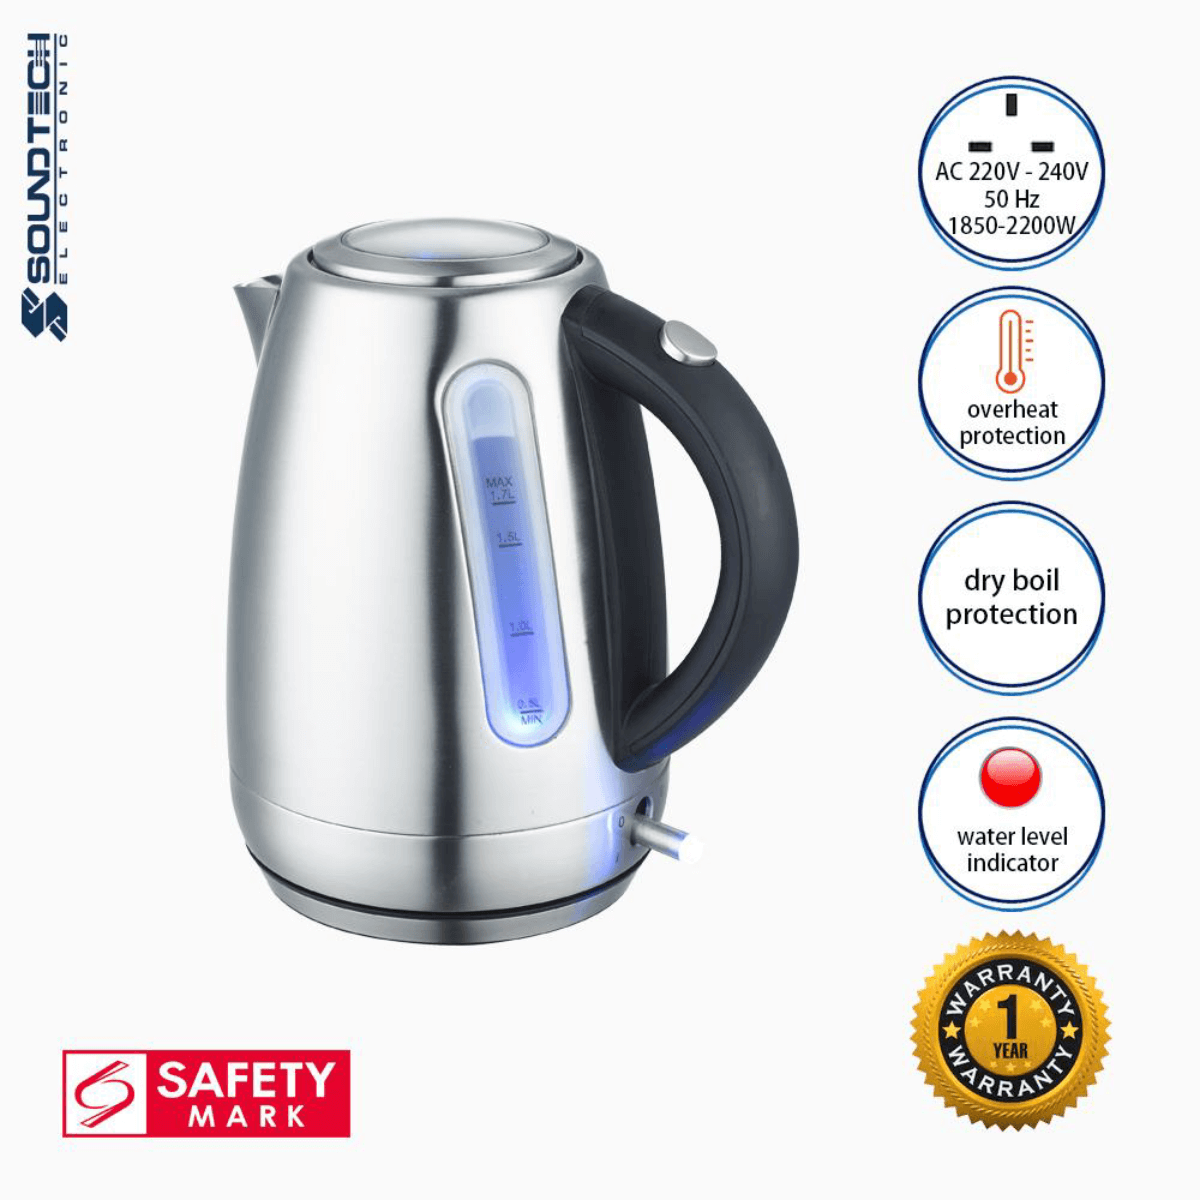 Soundteoh 1.7L Electric Kettle WK-208S